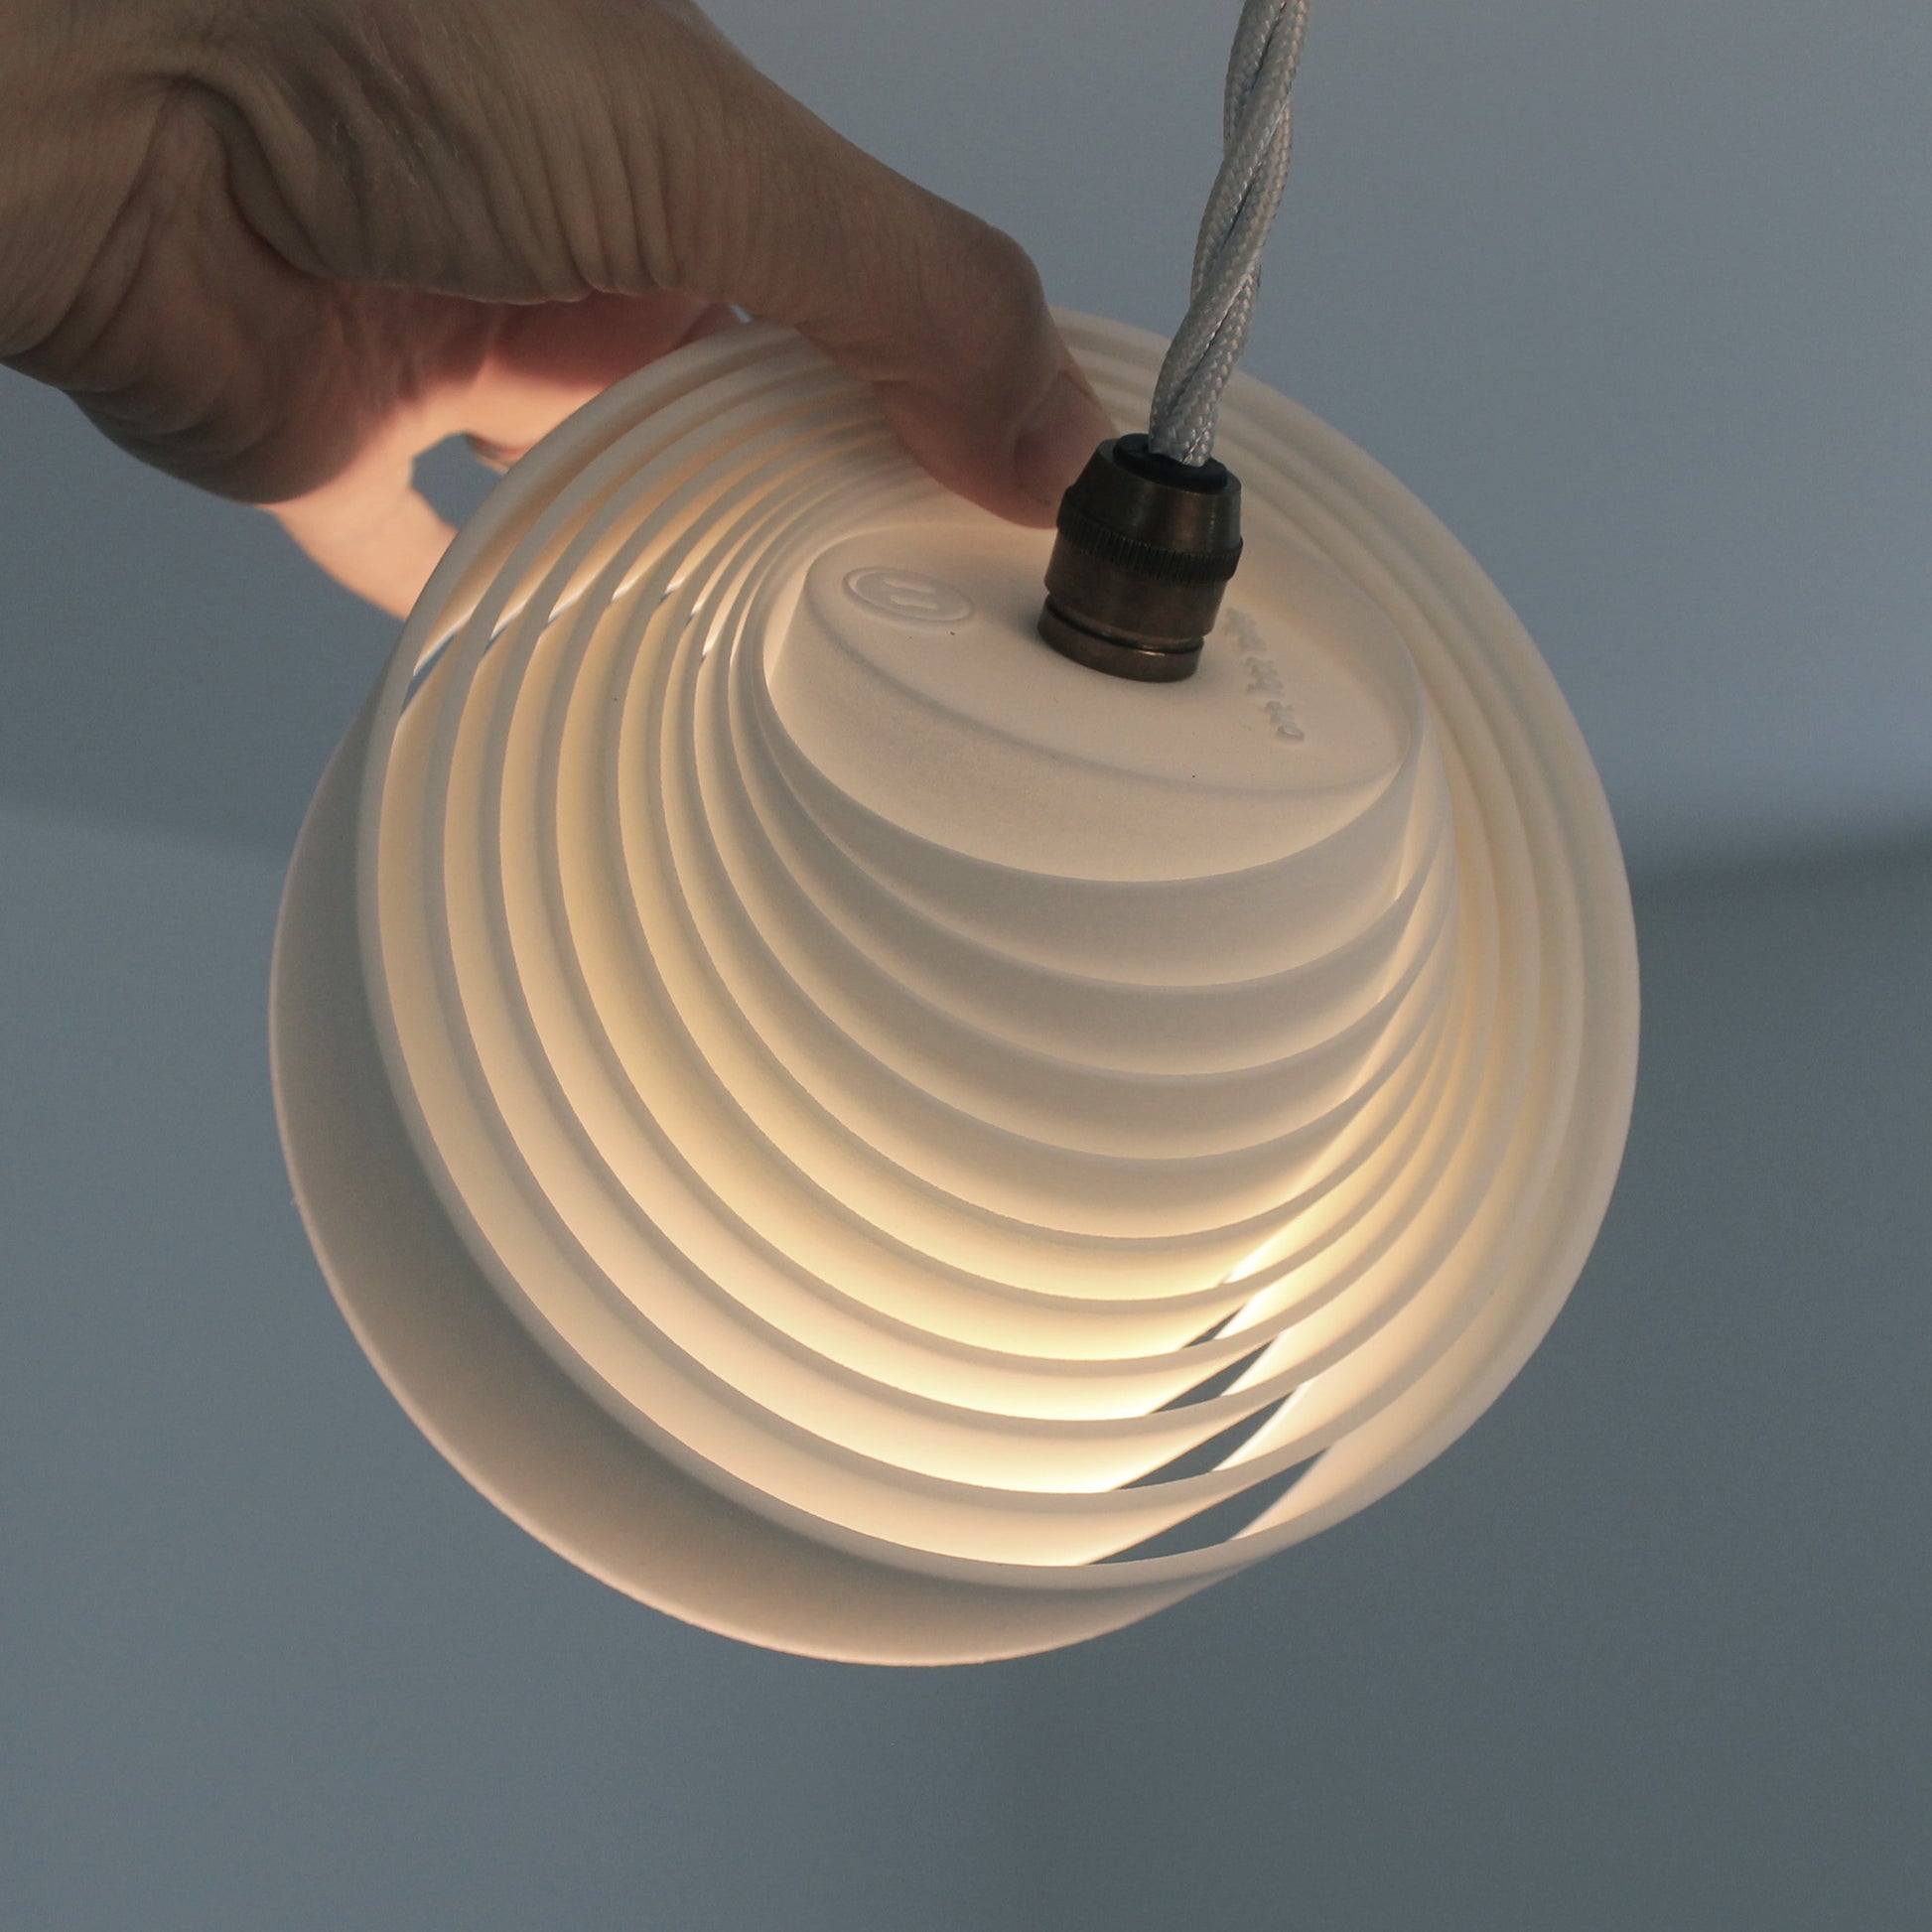 Whip Suspension pendant lighting, directional, malleable form, manipulate pieces, flattened, collapsed